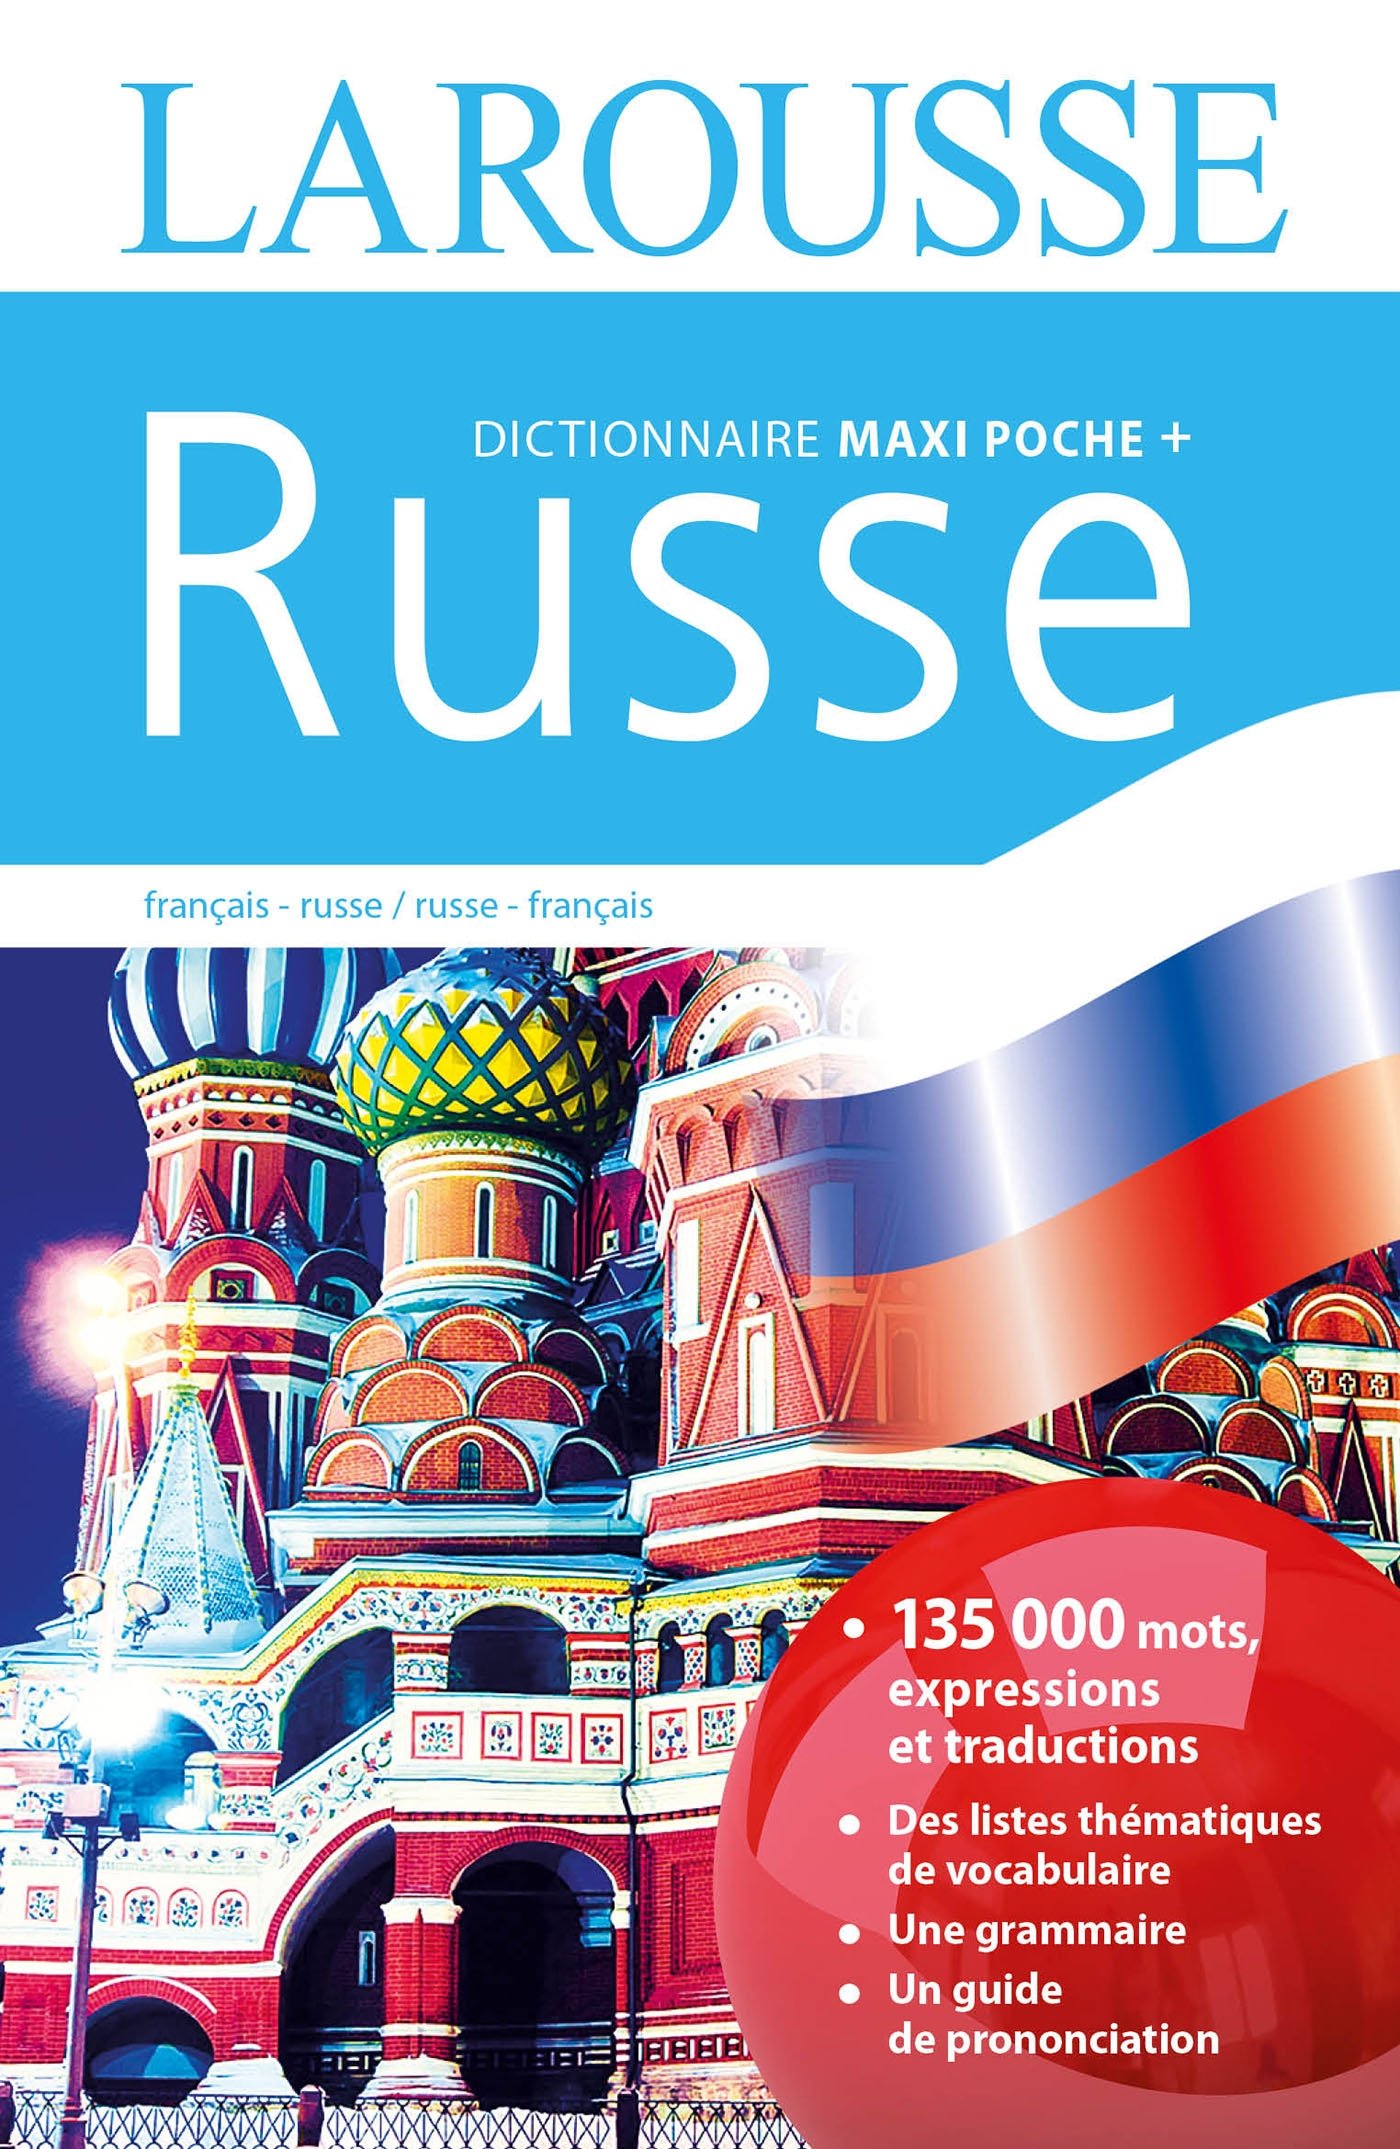 Dictionnaire Larousse maxi poche plus russe (French and Russian Edition)